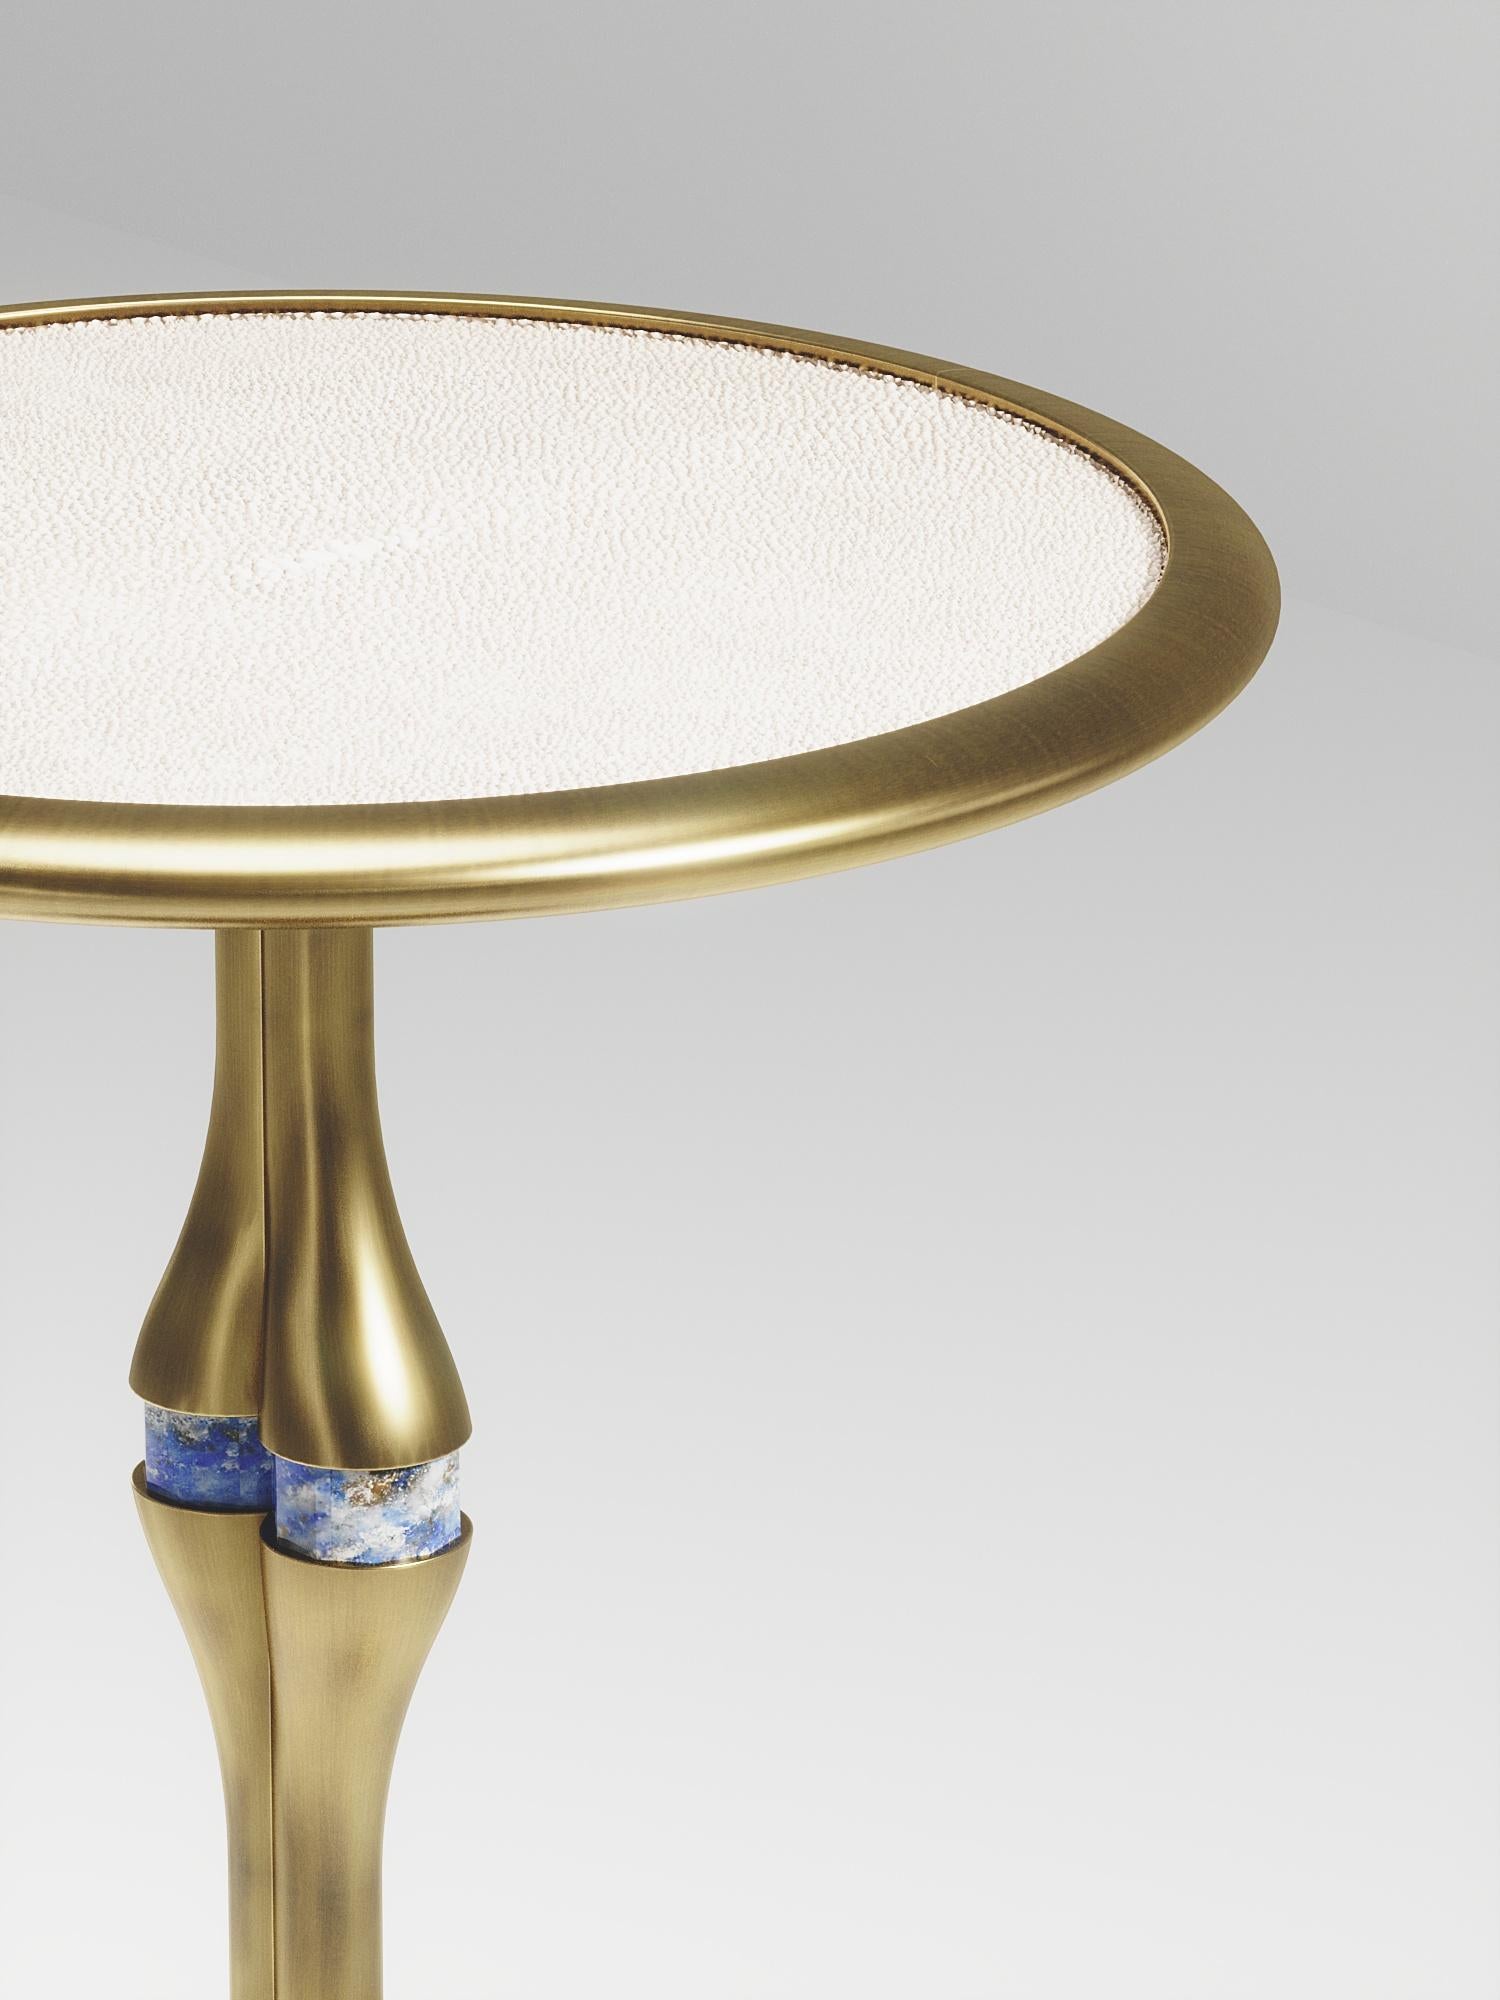 Shagreen Side Table with Bronze-Patina Brass Details by R&Y Augousti For Sale 2